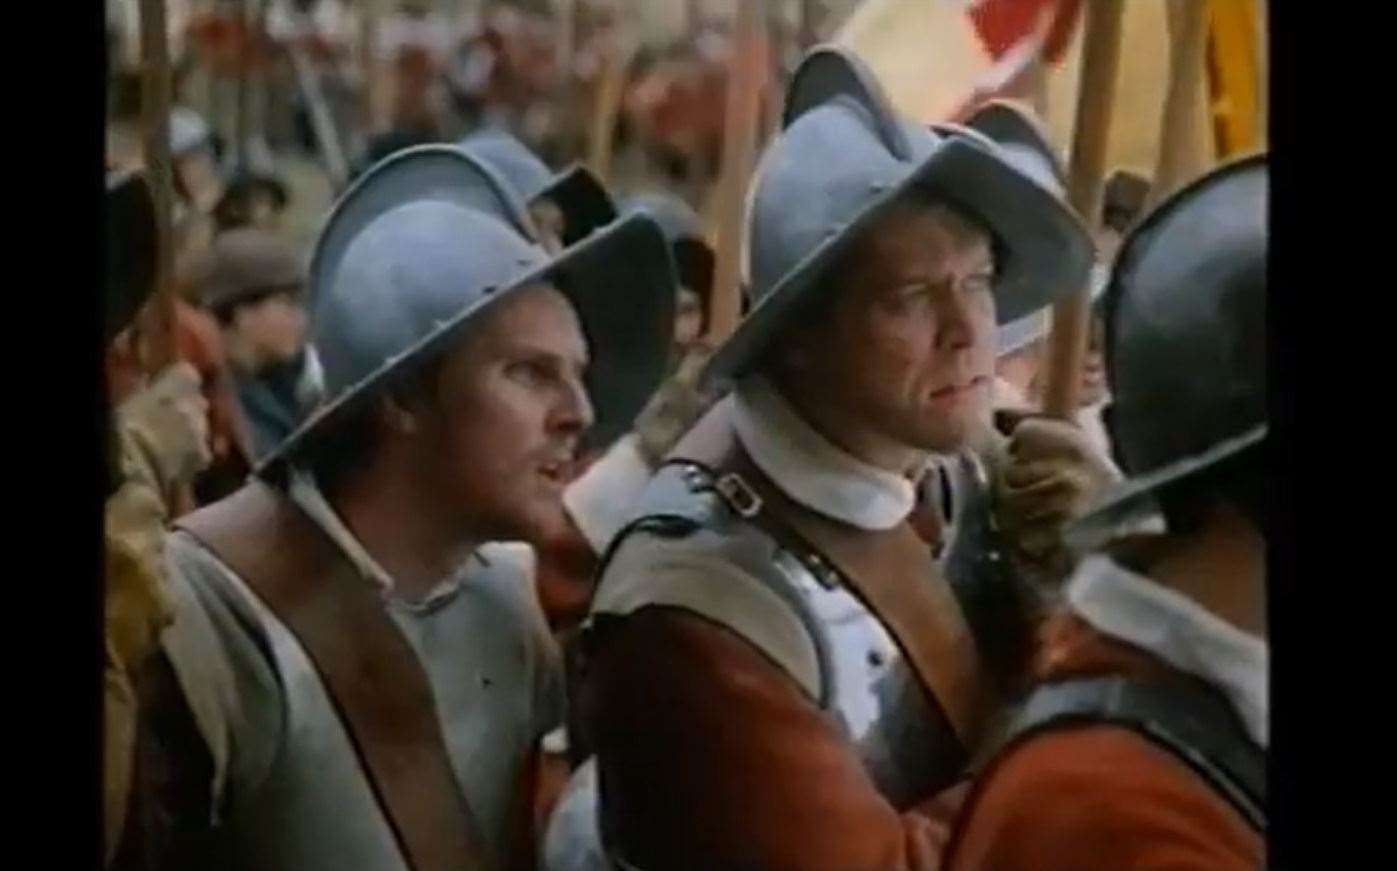 News of their opponents' breakfast doesn't go down well with the Roundhead troops